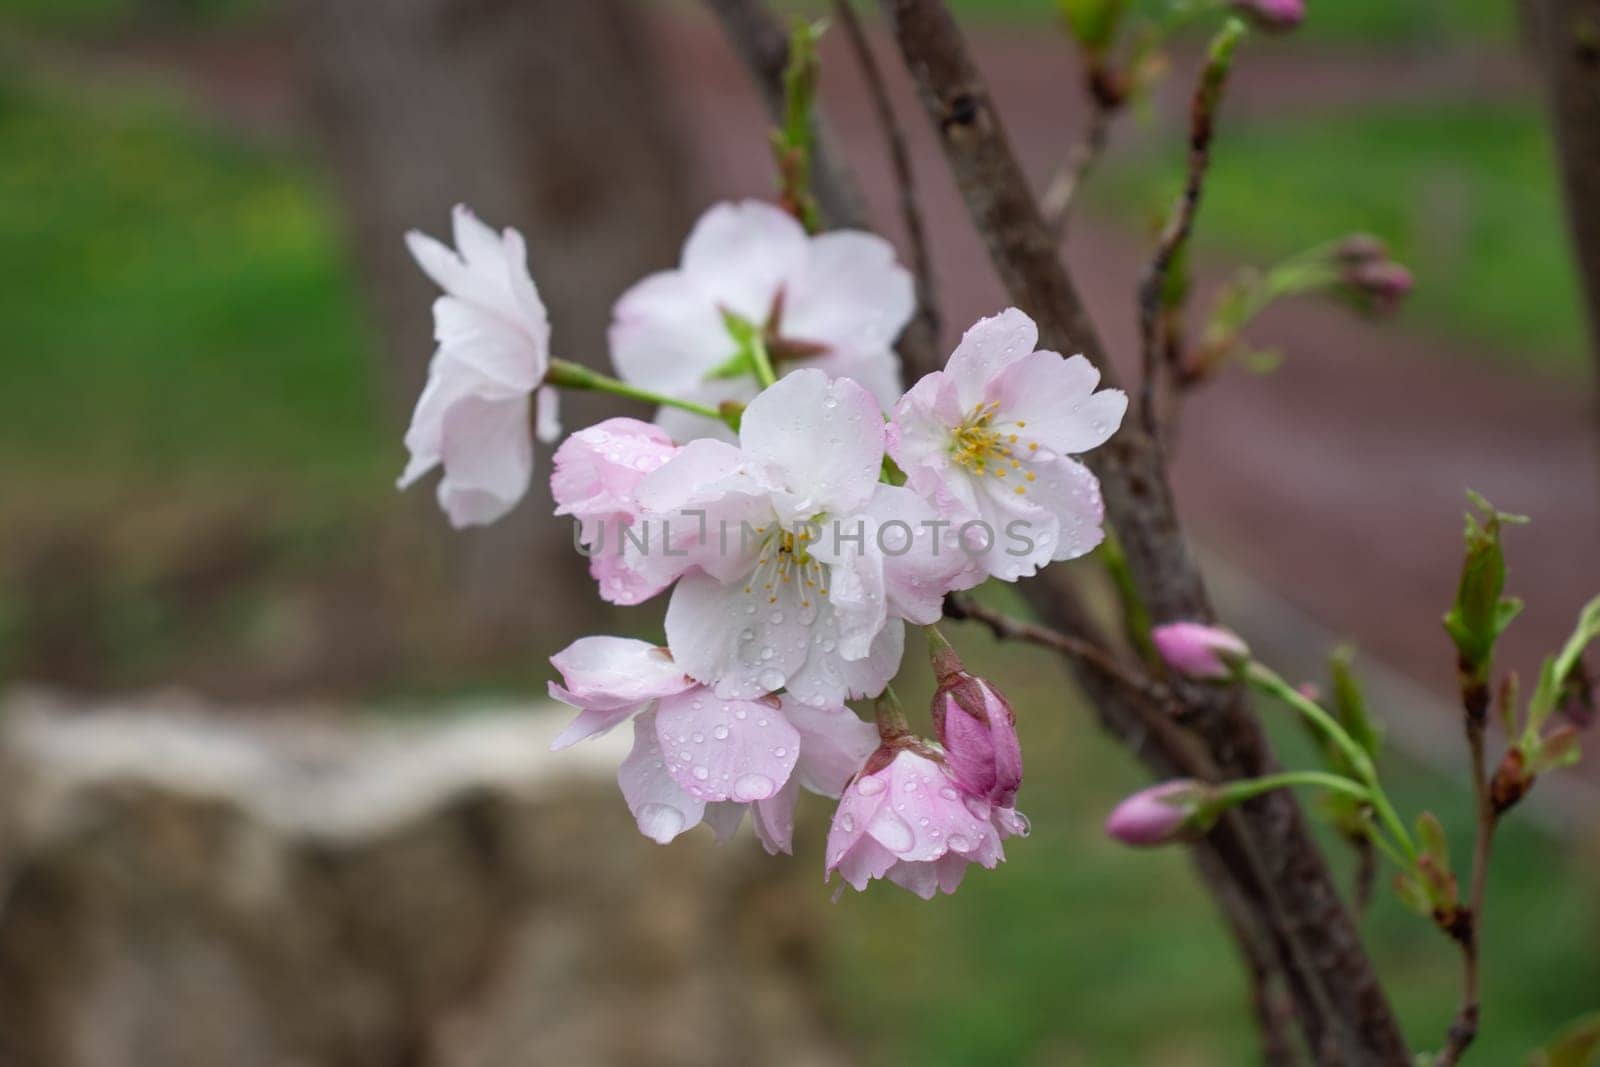 Close up pink flower with rain drops concept photo. Photography with blurred background. Countryside at spring season. Spring garden blossom background